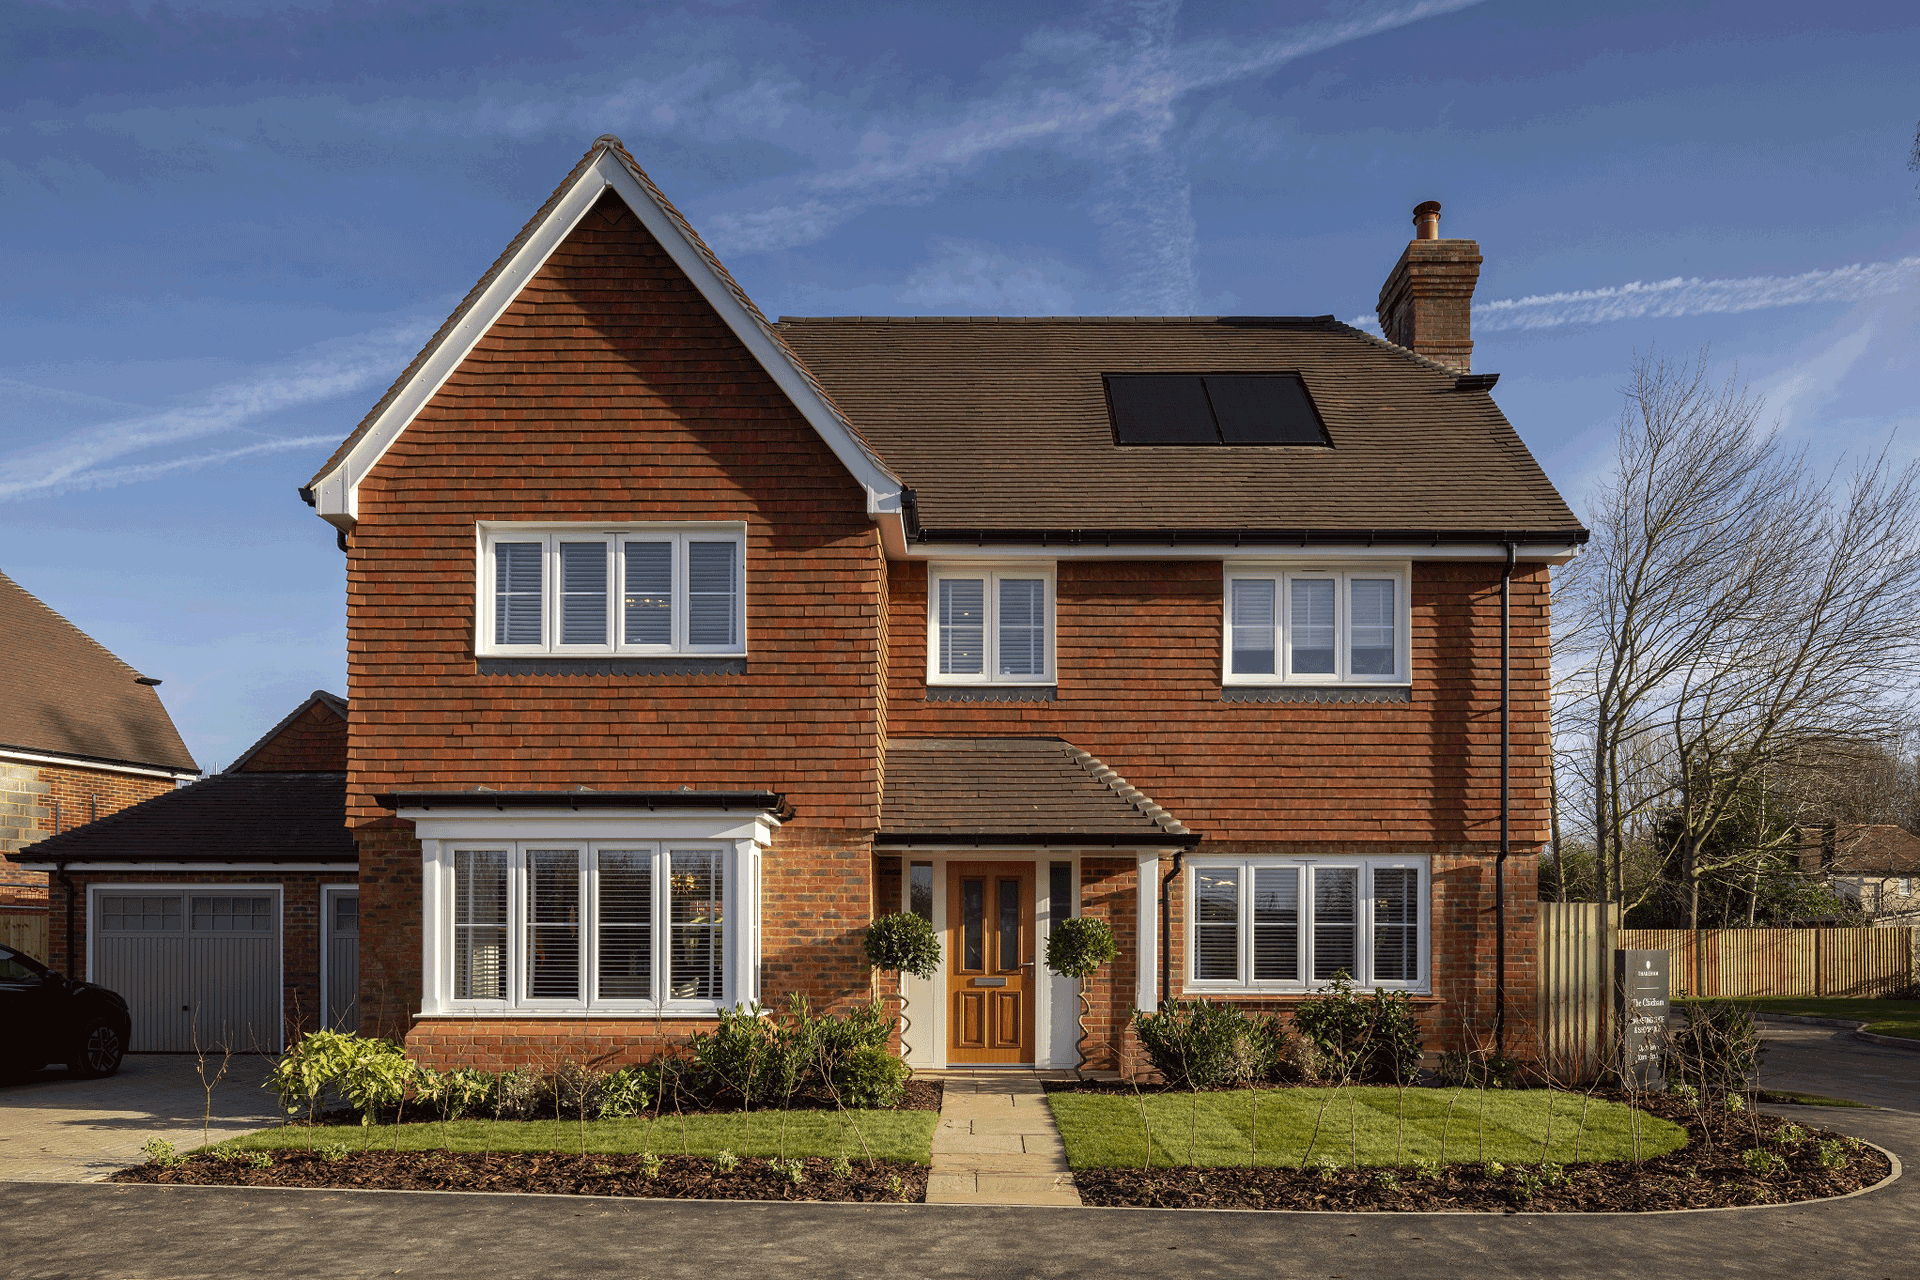 Red brick show home in West Horsley, Surrey